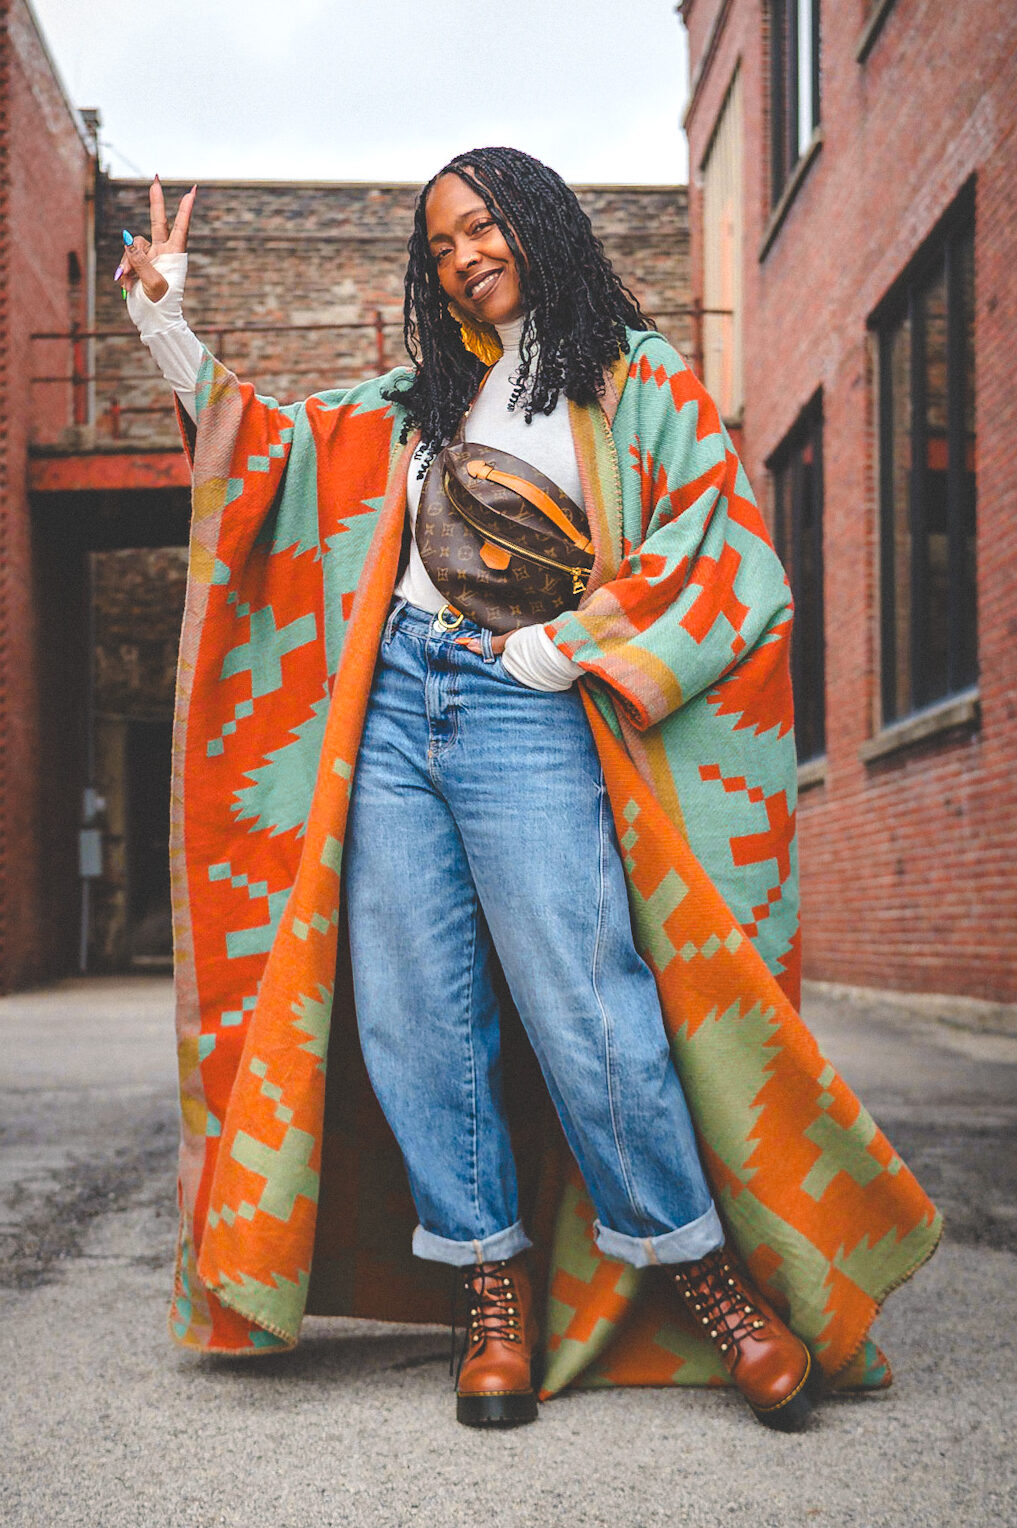 SWEENEE STYLE, INDIANAPOLIS FASHION, INDIANAPOLIS STYLE BLOG, SWEENEE, WINTER OUTFIT IDEA, WINTER OUTFITS, BLACK GIRLS WHO BLOG, BLACK GIRL INFLUENCERS, BLACK GIRL CONTENT CREATORS